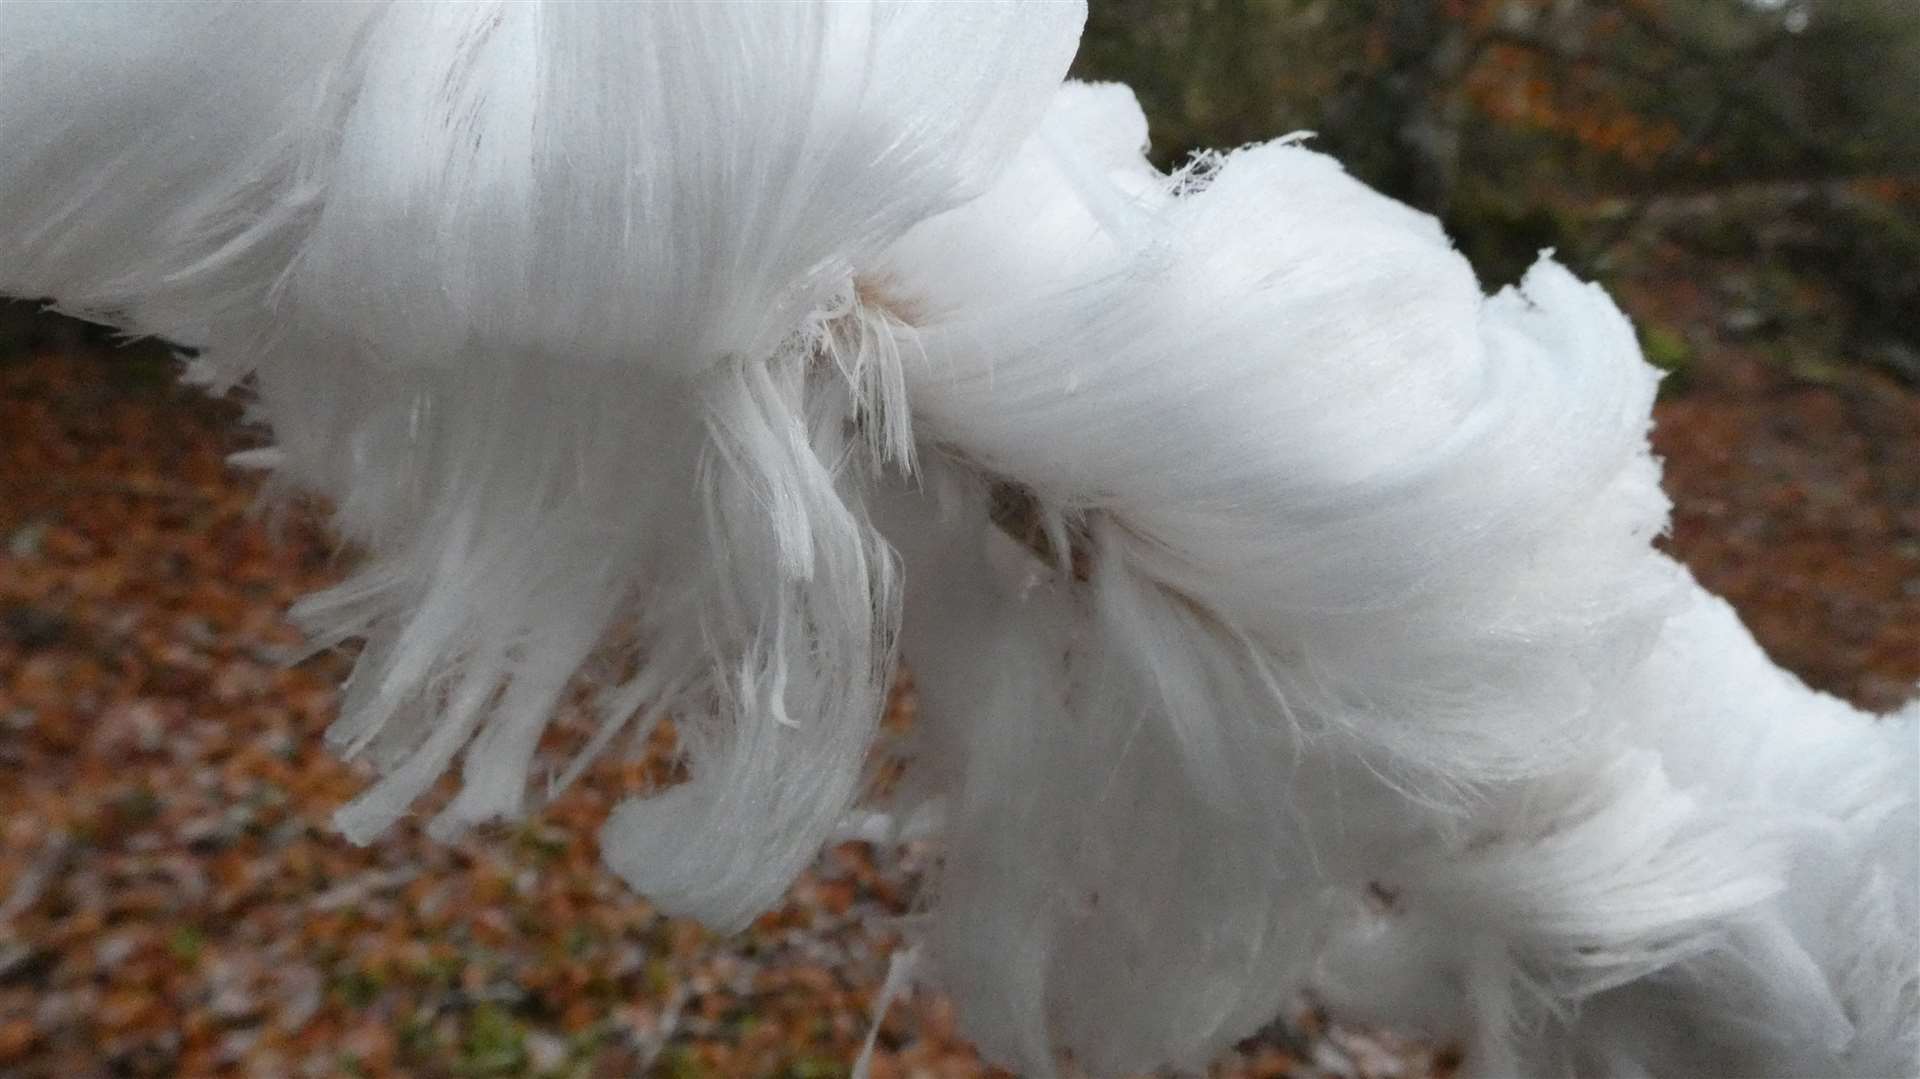 Suzie Clark, from Forres, captured this image of hair ice at Randolph's Leap at the weekend.